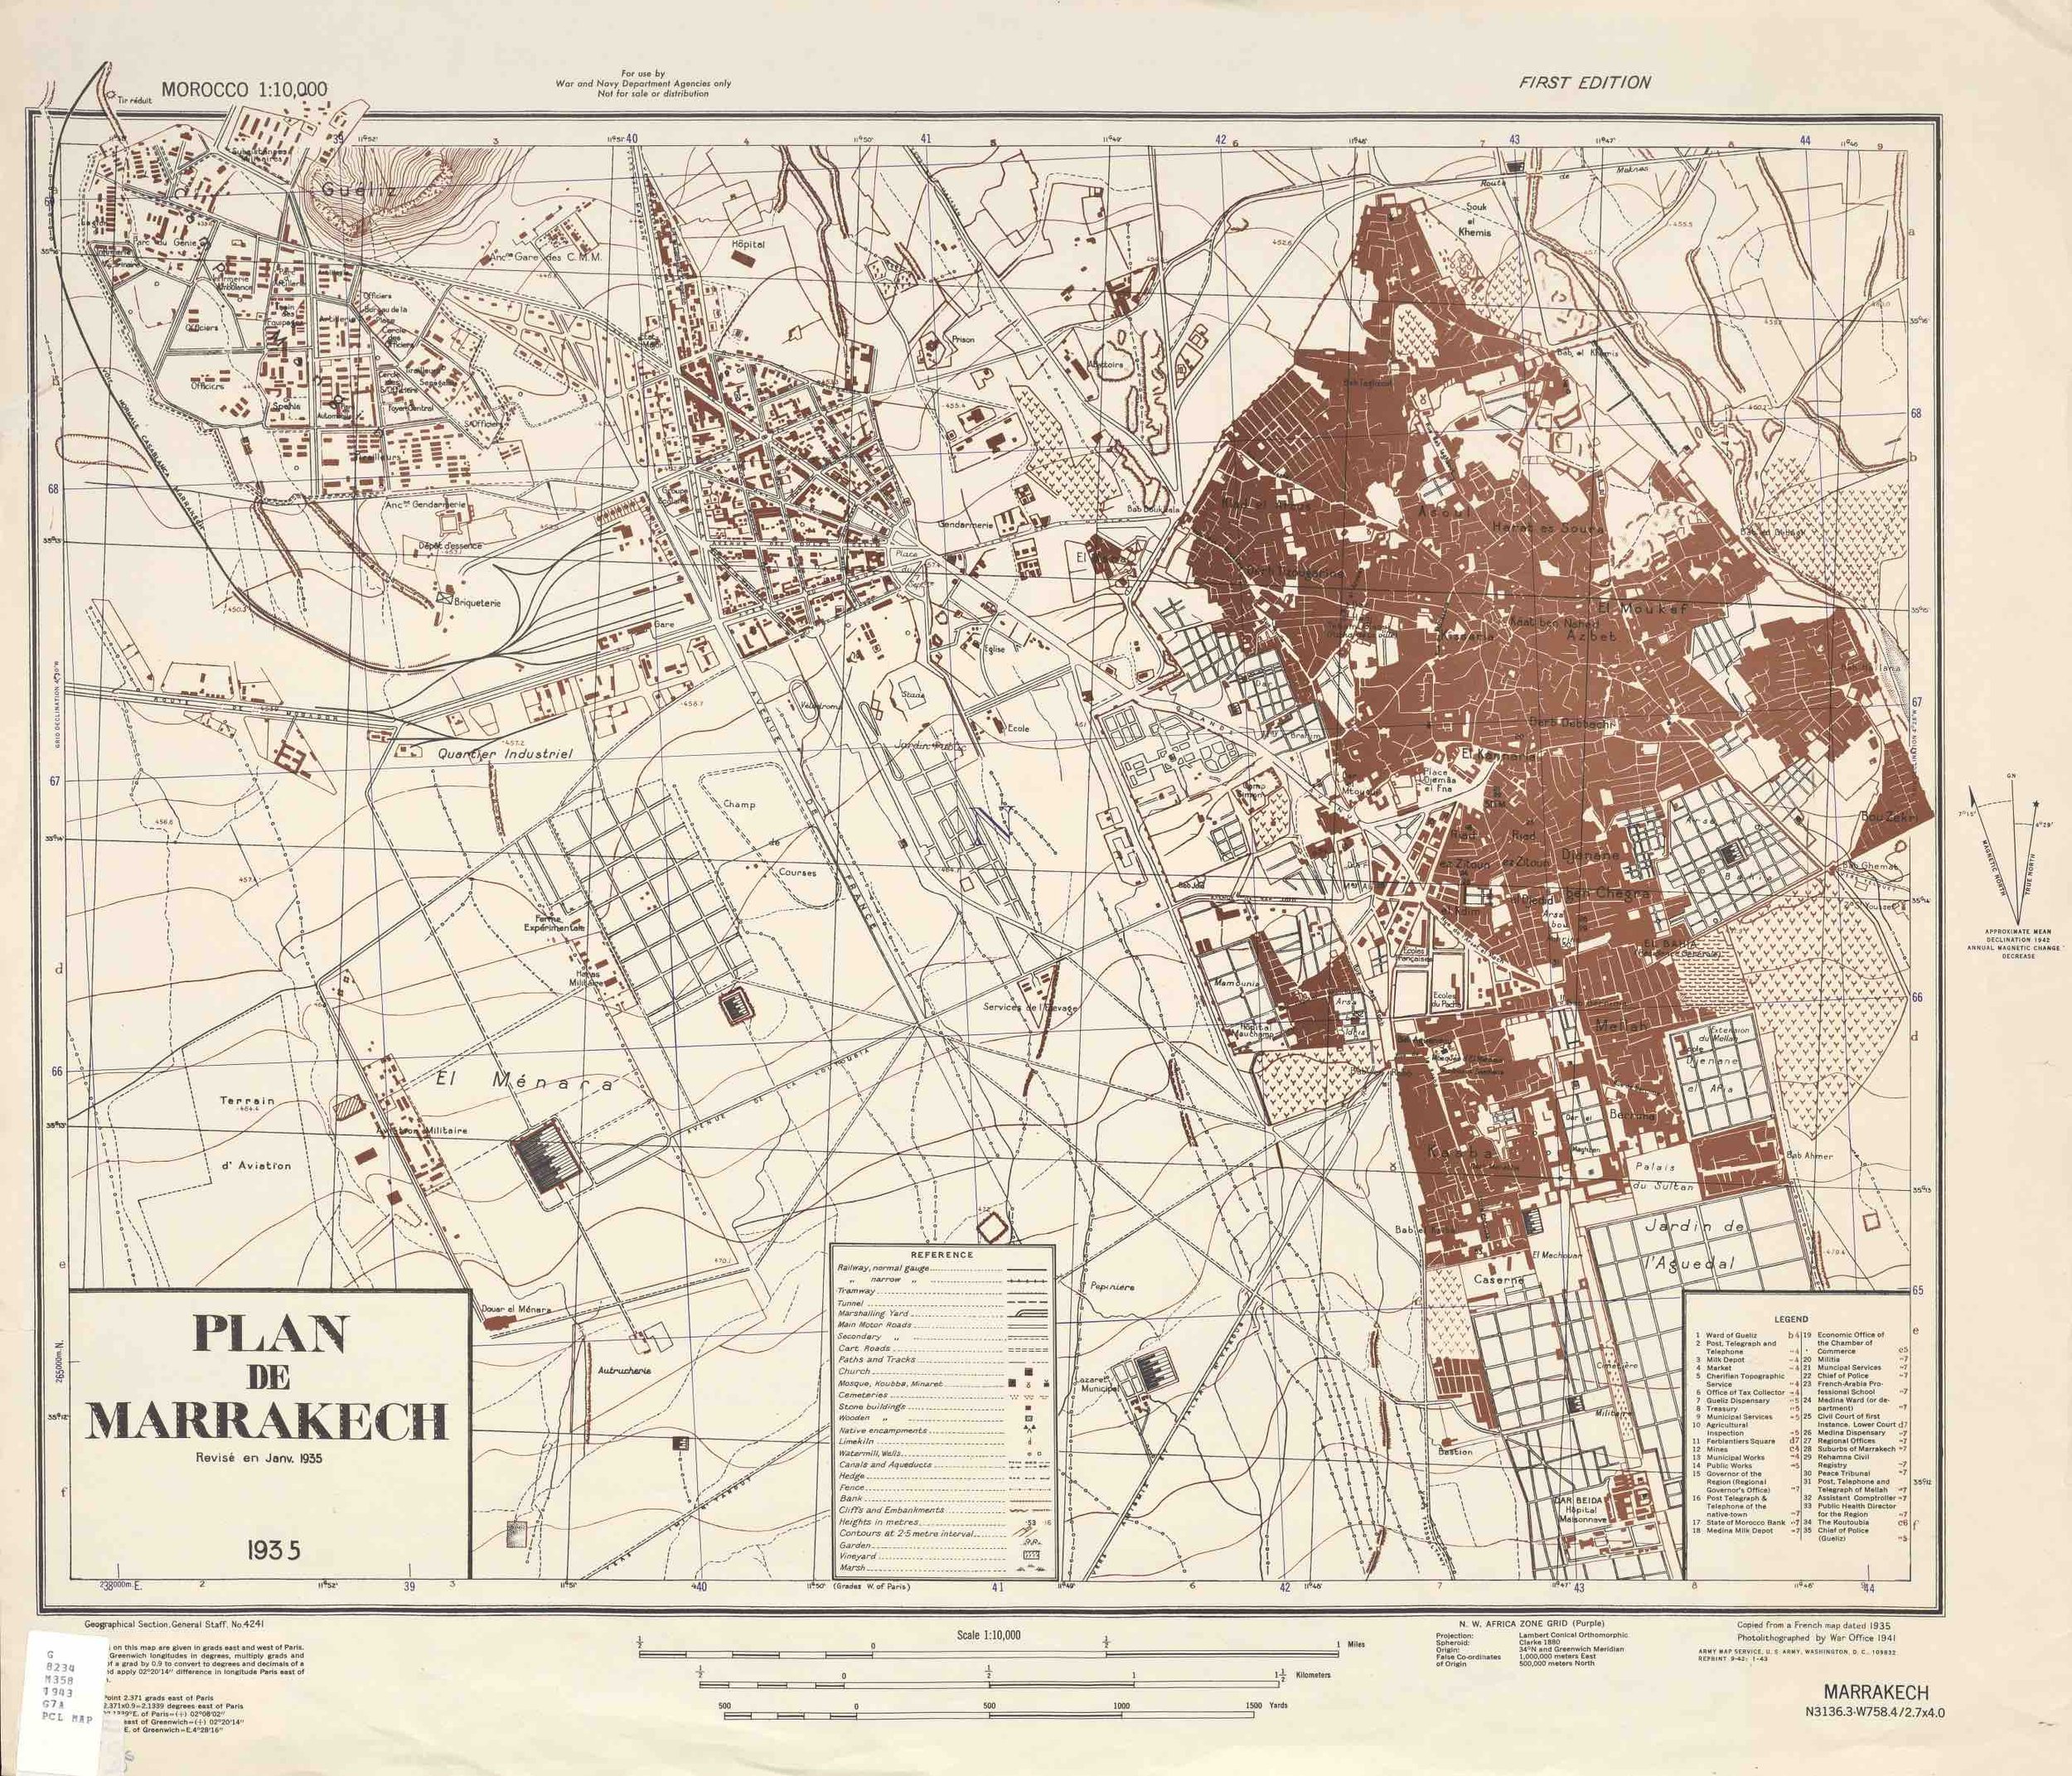 Map of Marrakesh 1935 (Army Map Service)